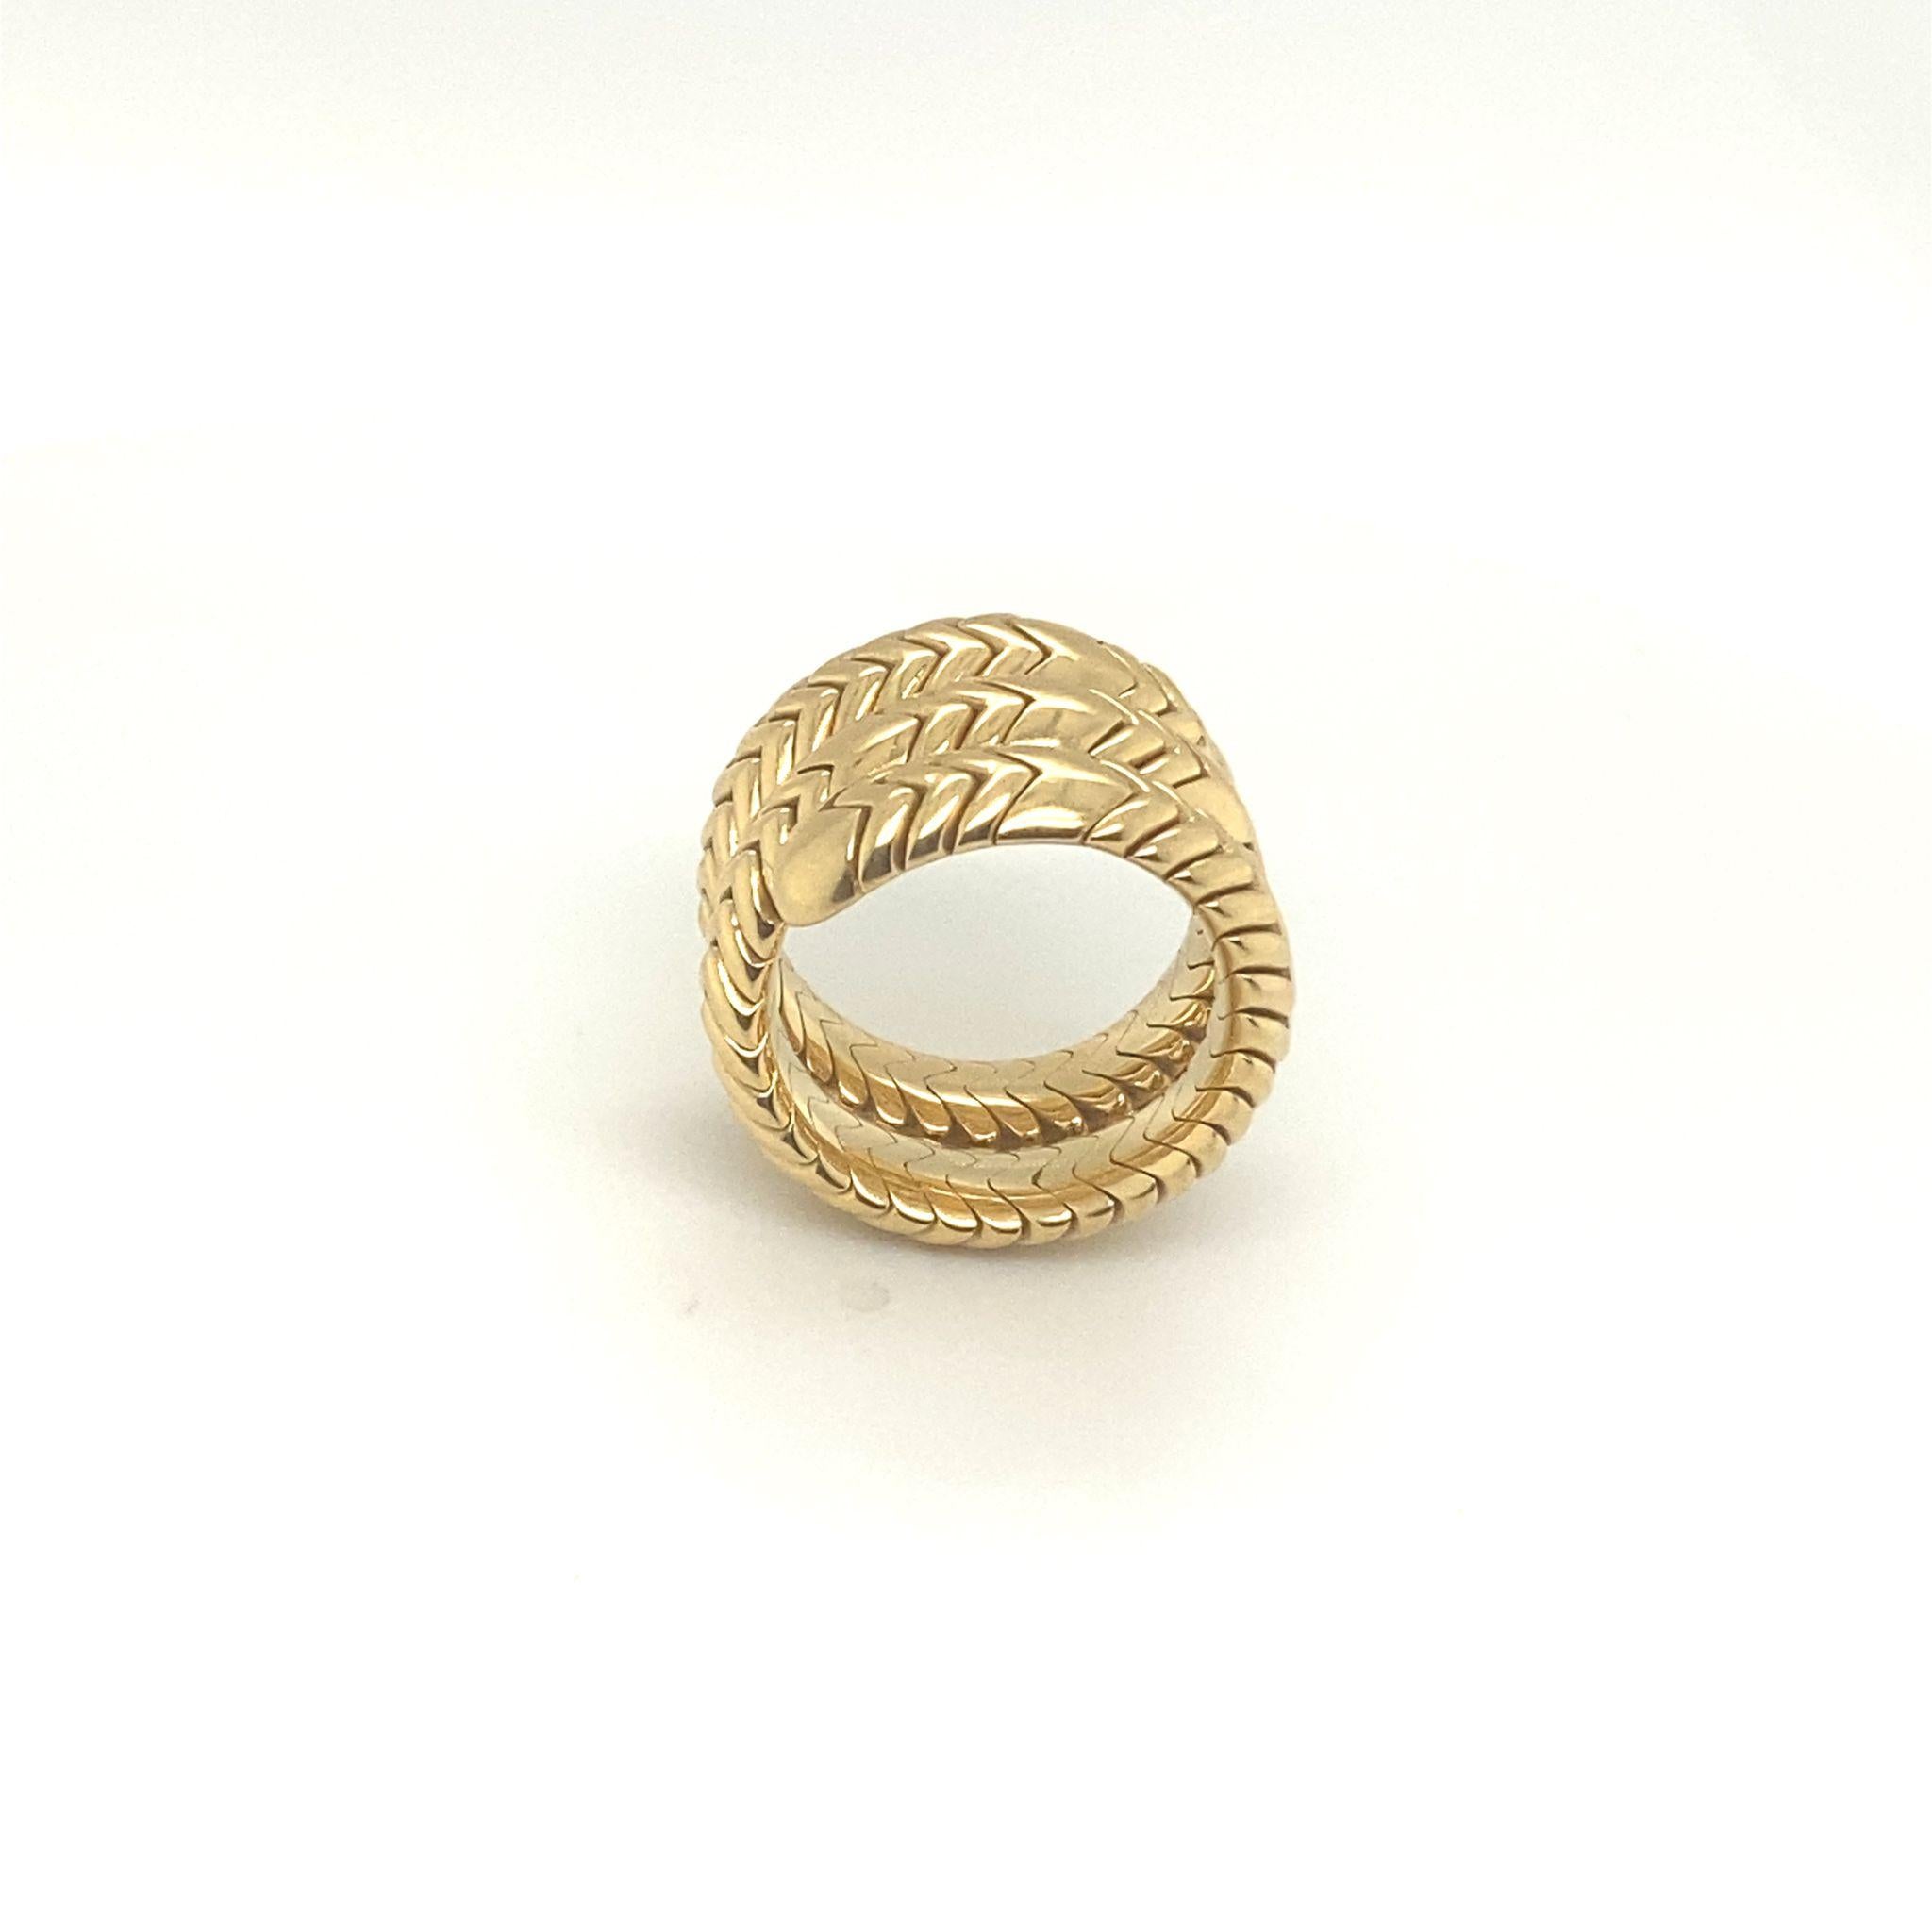 This discontinued yellow gold ring original BVLGARI is size Small (approx 5.5US) and it's flexible. 
It comes in its original box. Signed and numbered in excellent condition.
approx 1990s. 
23 grams
Lenght: 0.75 In.